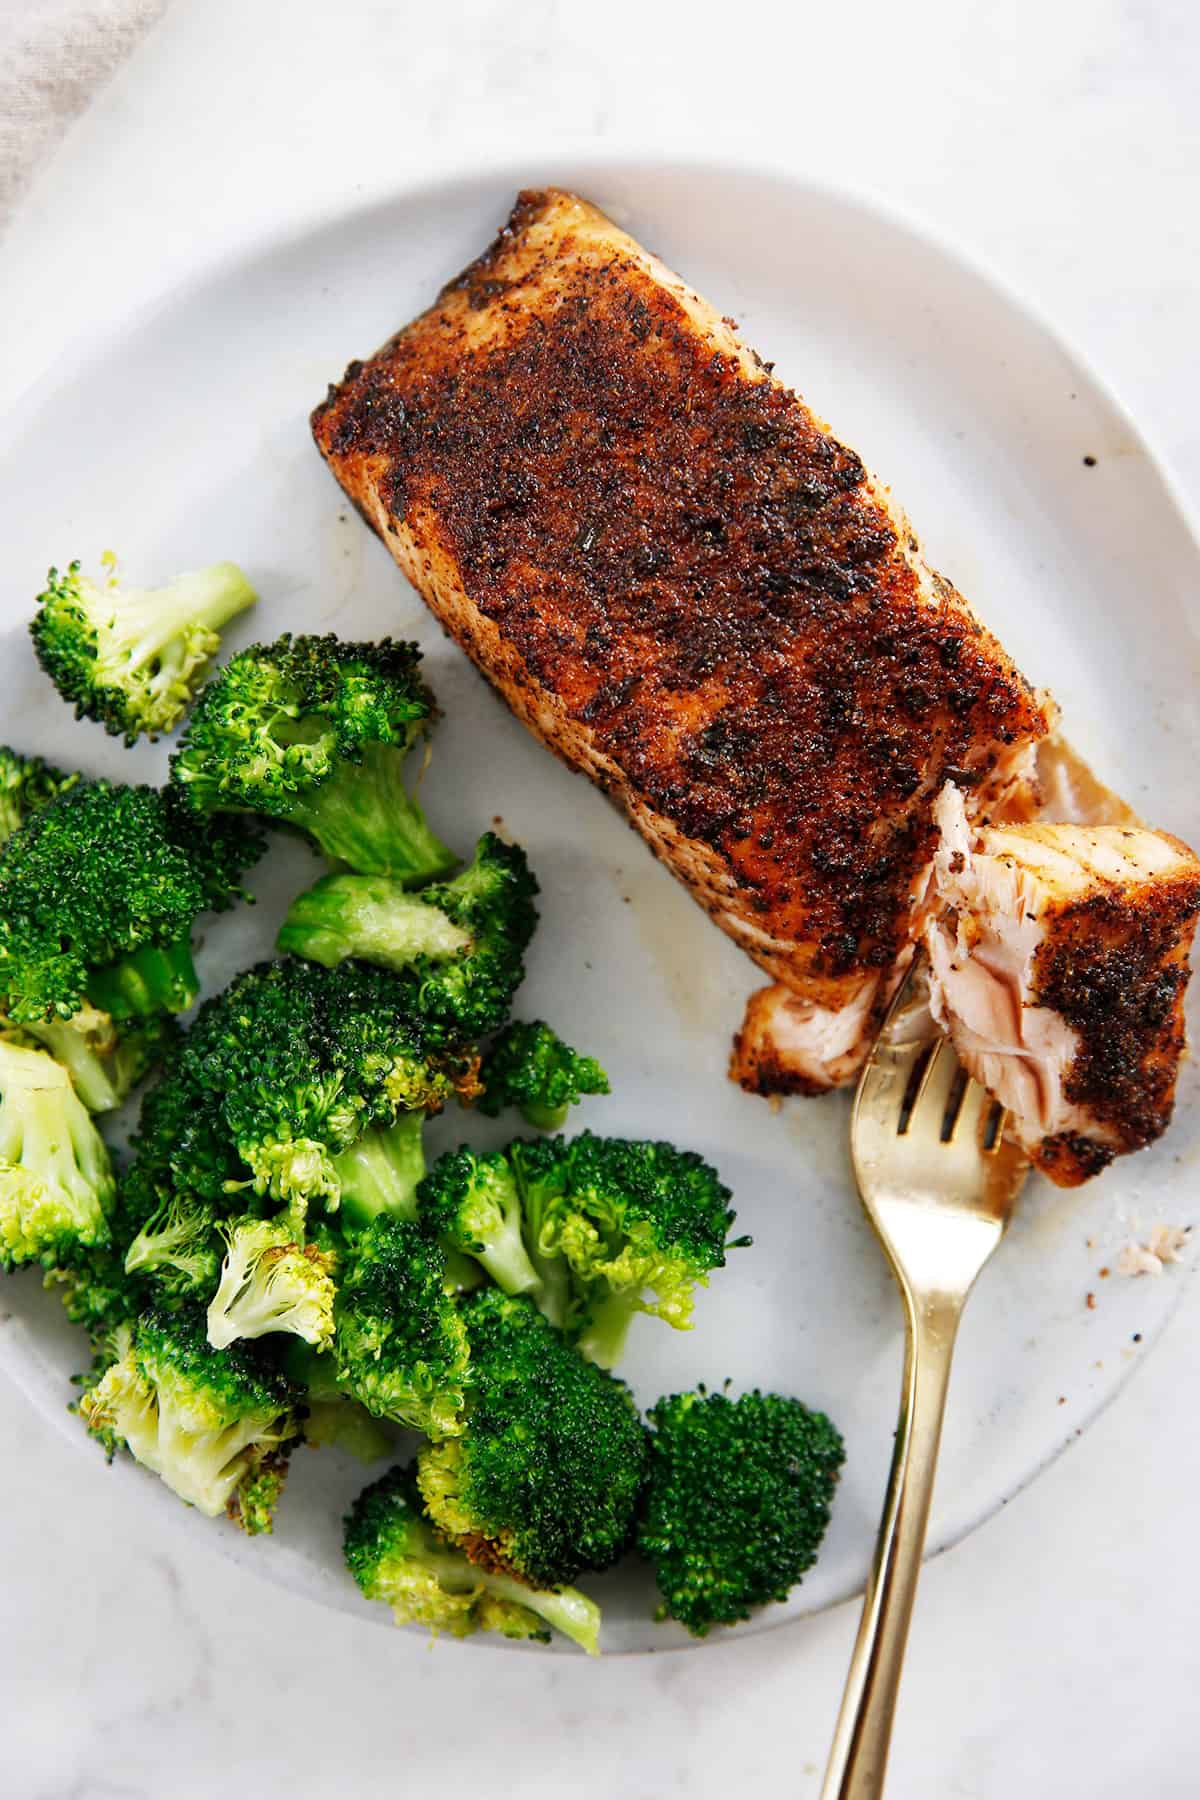  air fryer broccoli recipe on a plate with salmon